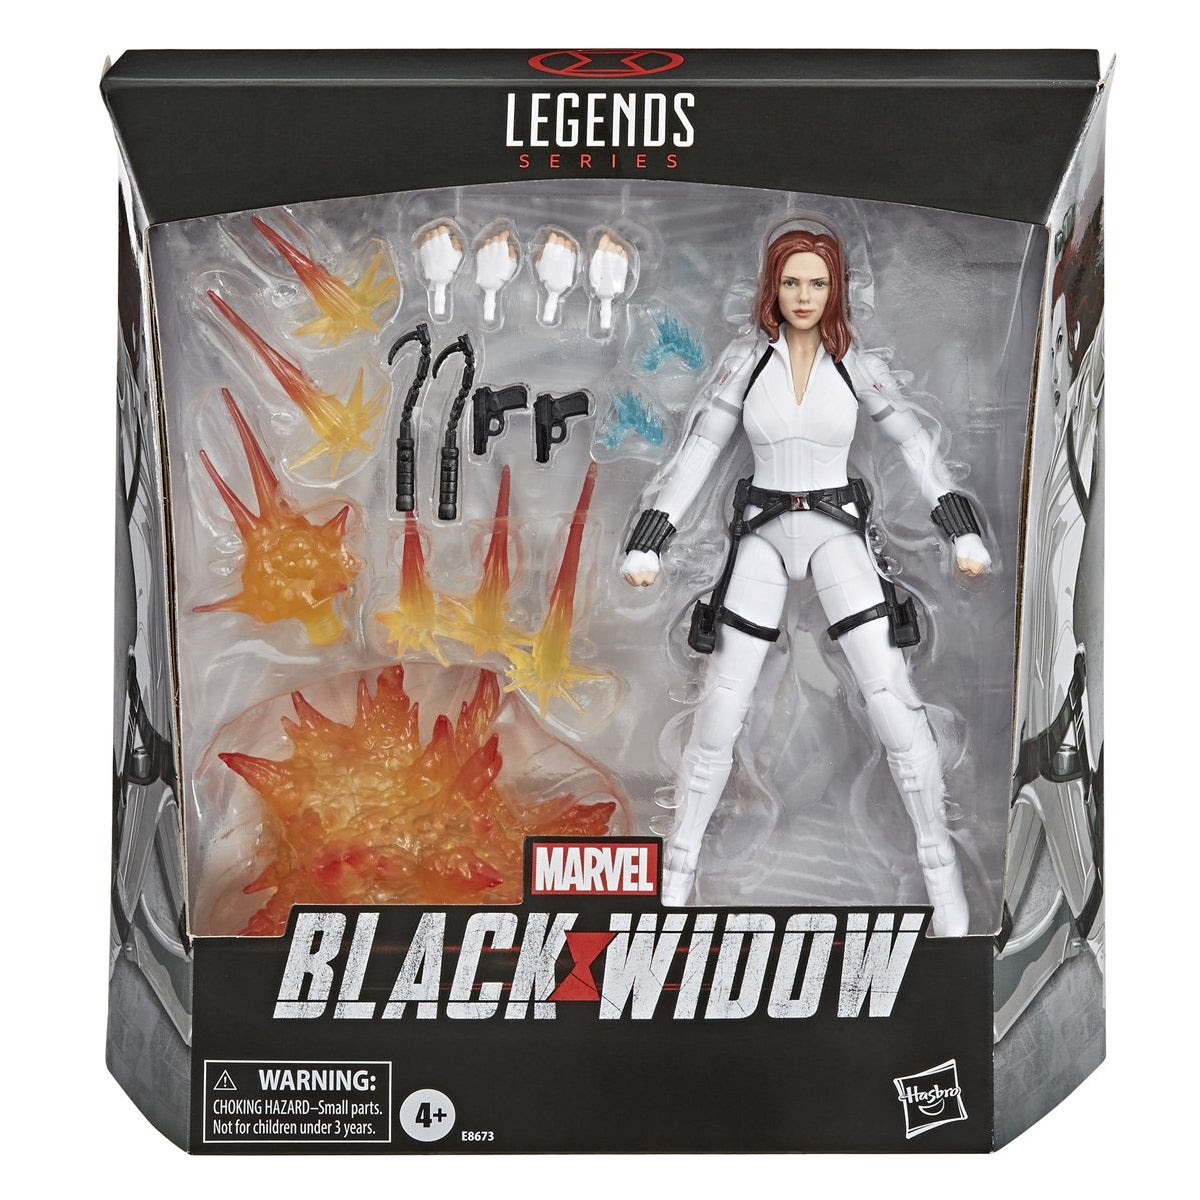 Image of Marvel Legends Deluxe Black Widow Movie Figure by Hasbro - APRIL 2020